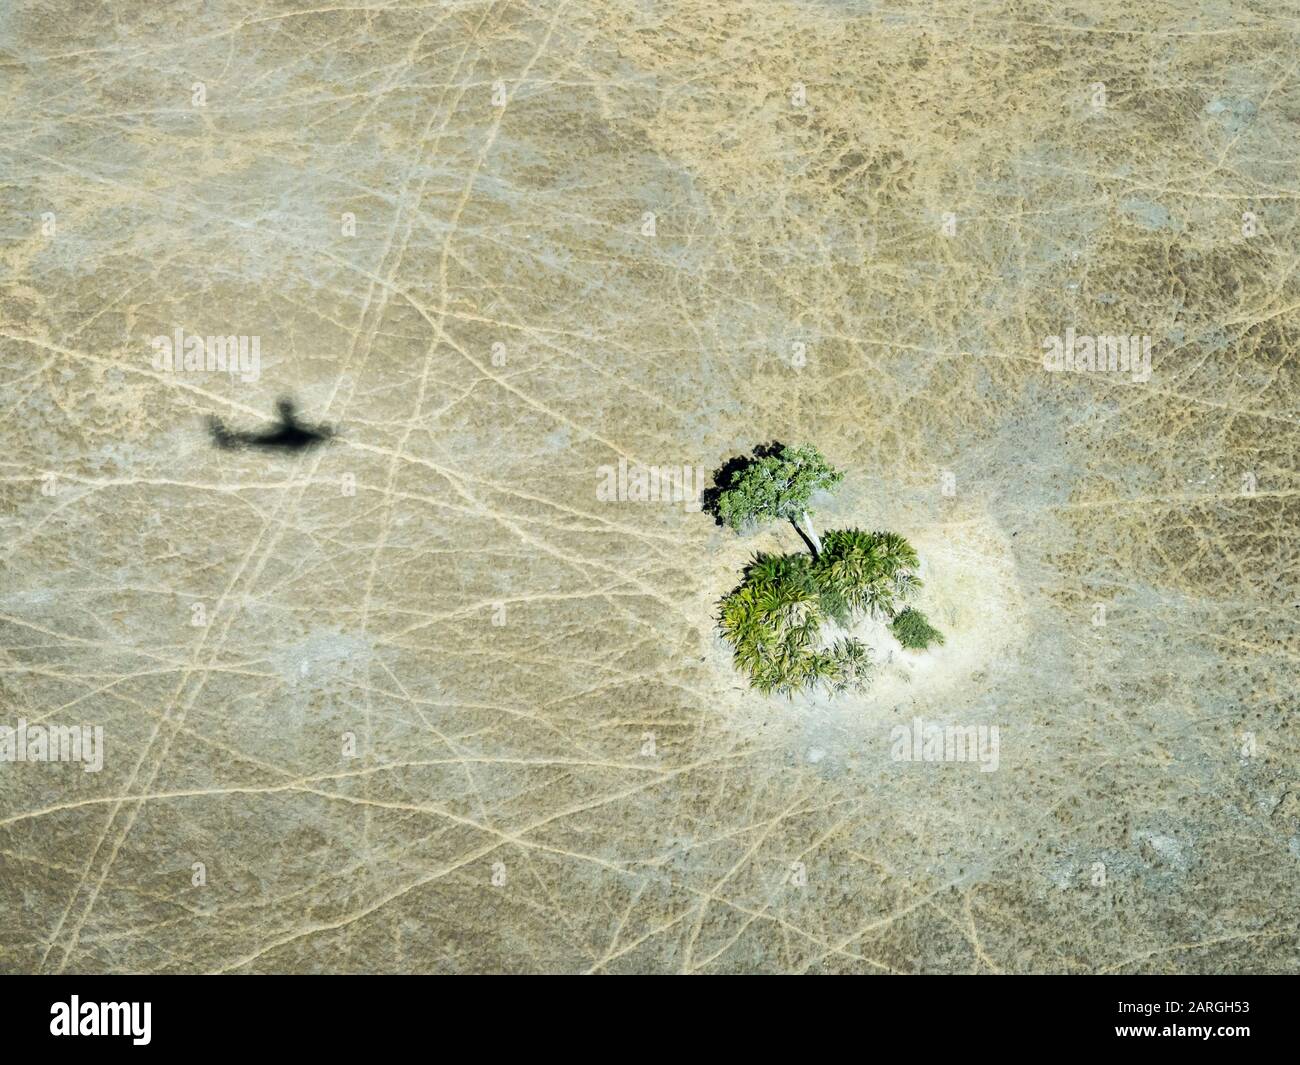 Aerial view of the Okavango Delta during drought conditions in early fall, Botswana, Africa Stock Photo